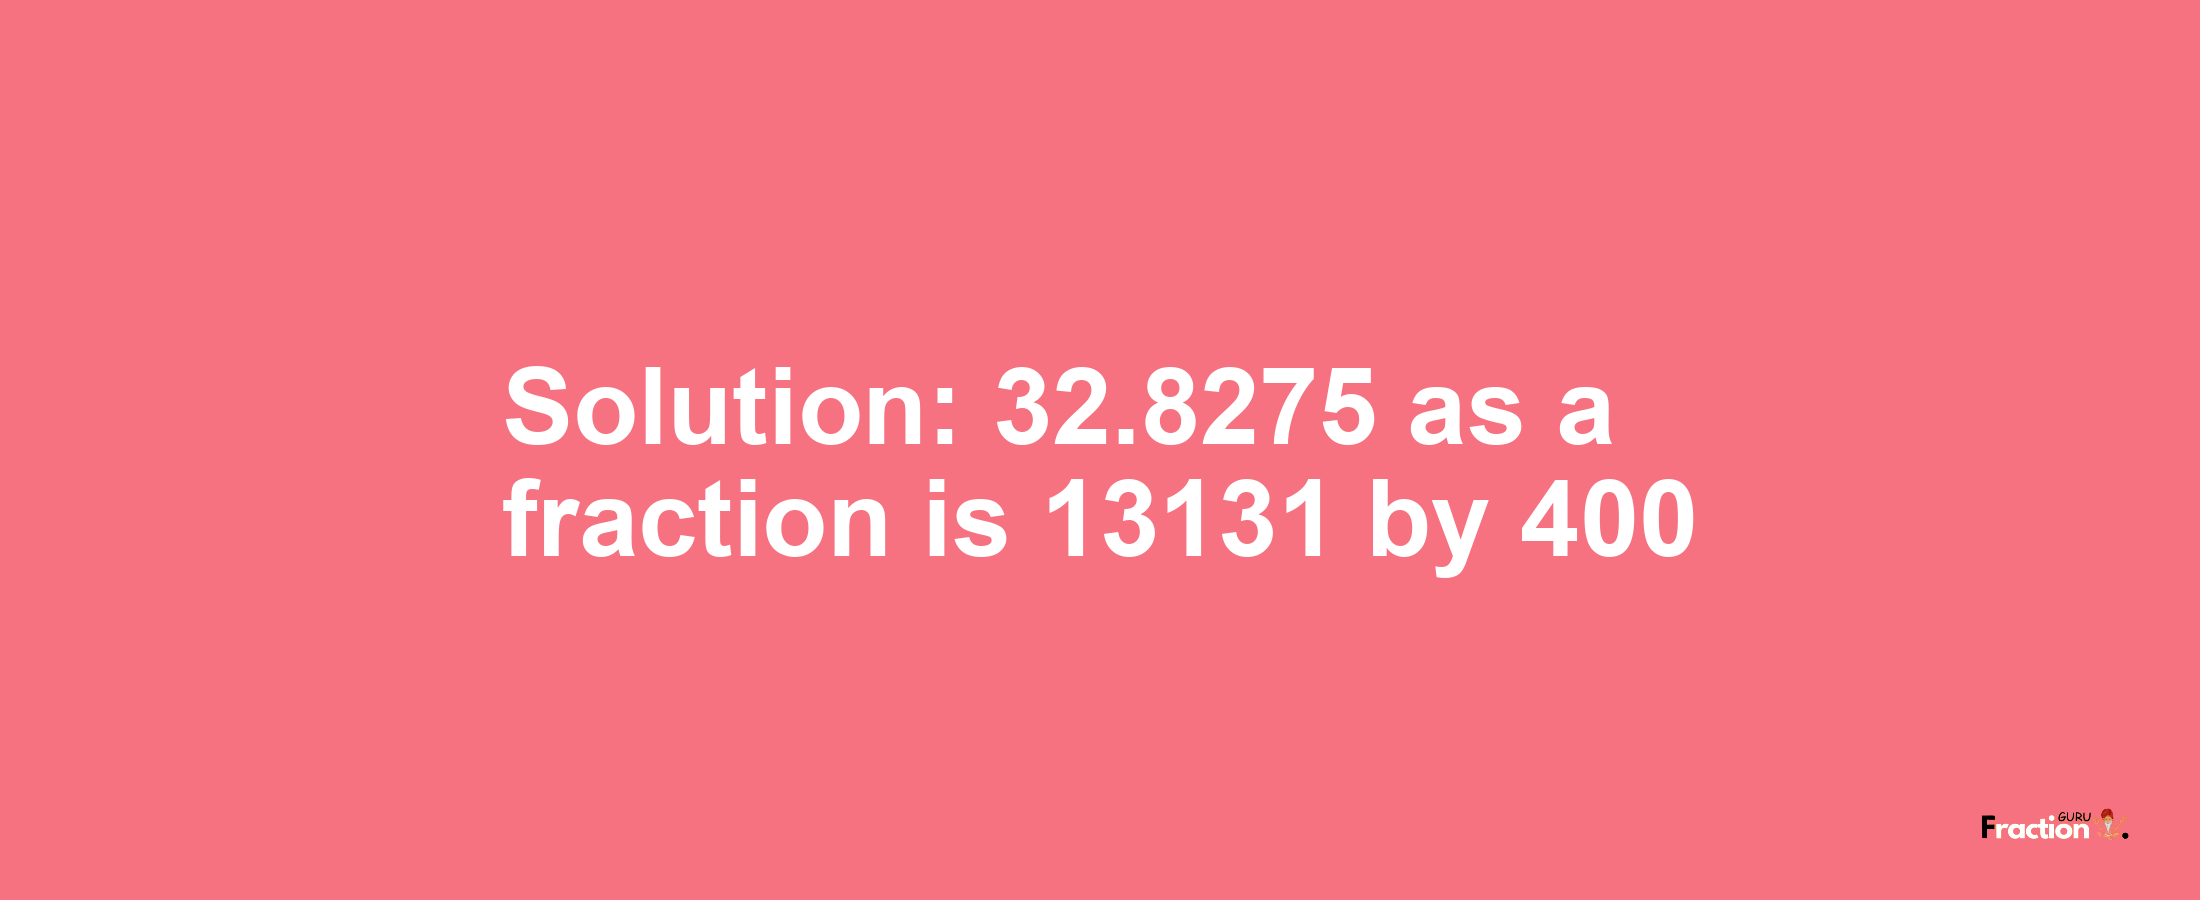 Solution:32.8275 as a fraction is 13131/400